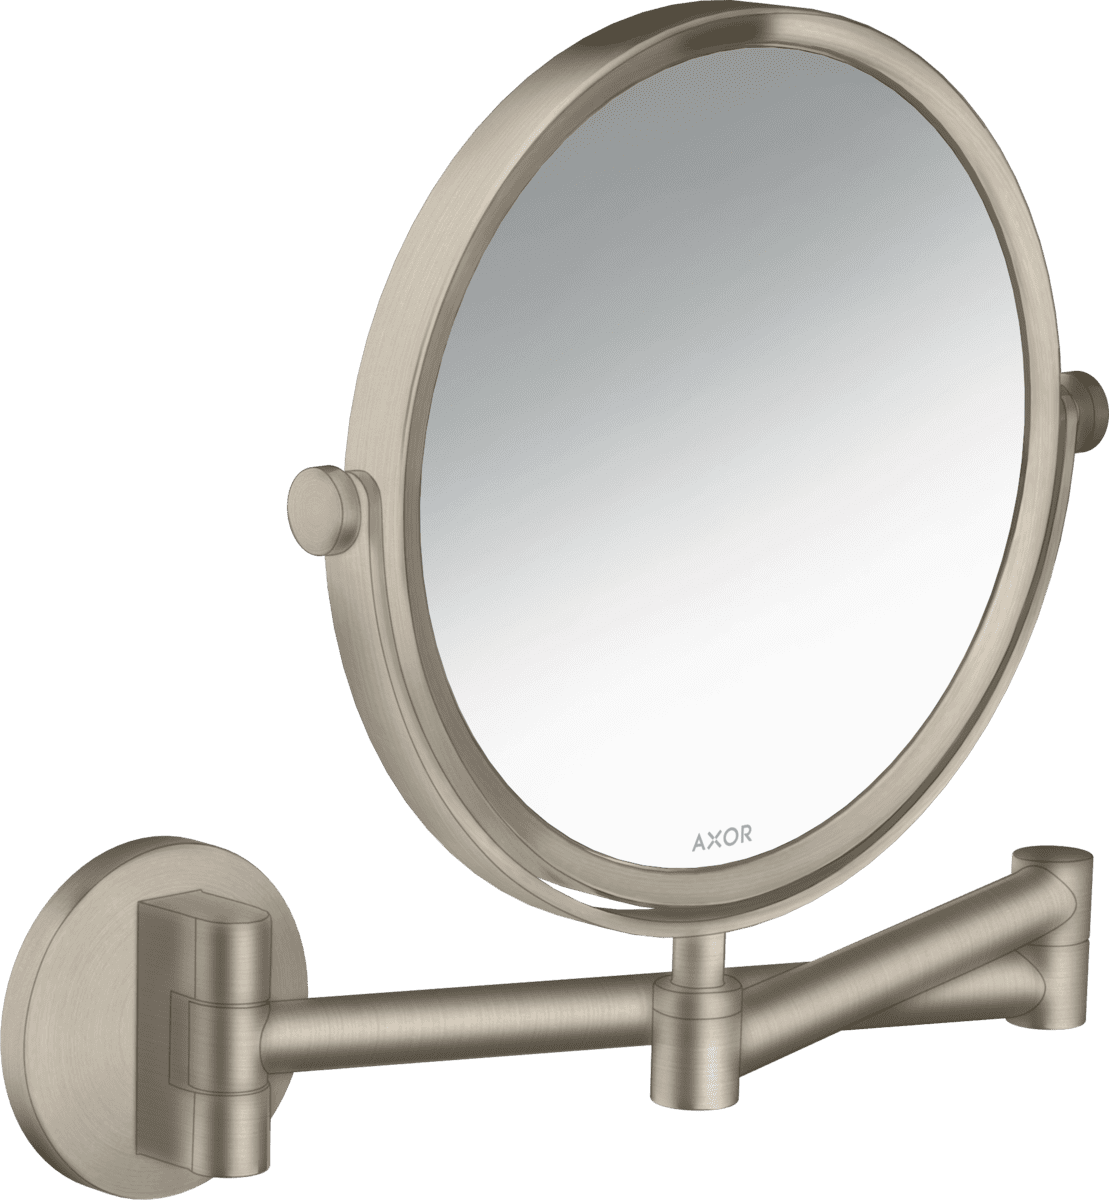 Picture of HANSGROHE AXOR Universal Circular Shaving mirror #42849820 - Brushed Nickel